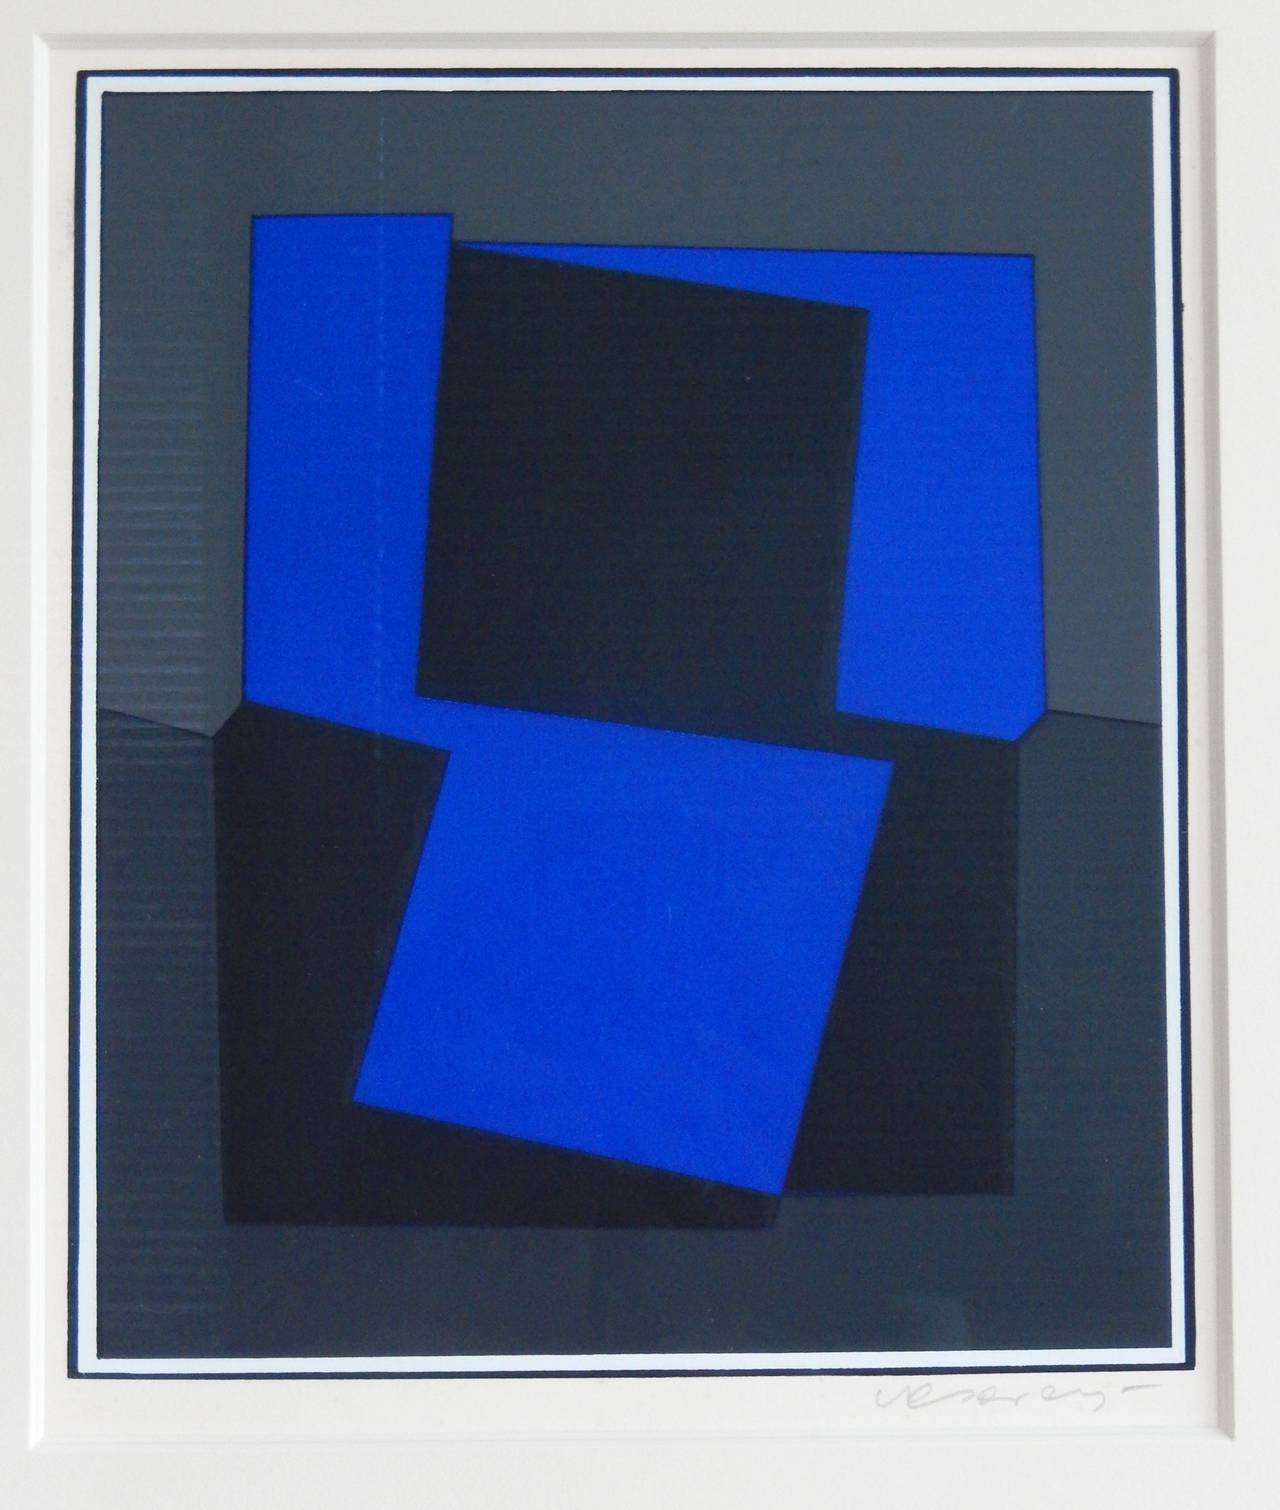 An early Victor Vasarely (1906-1997) silkscreen with pure, vibrant colors and a strong, geometric abstract style. A very beautiful and scarce print.
(A similar composition is illustrated in Vasarely, Marcel Joray, ed., editions Du Griffon